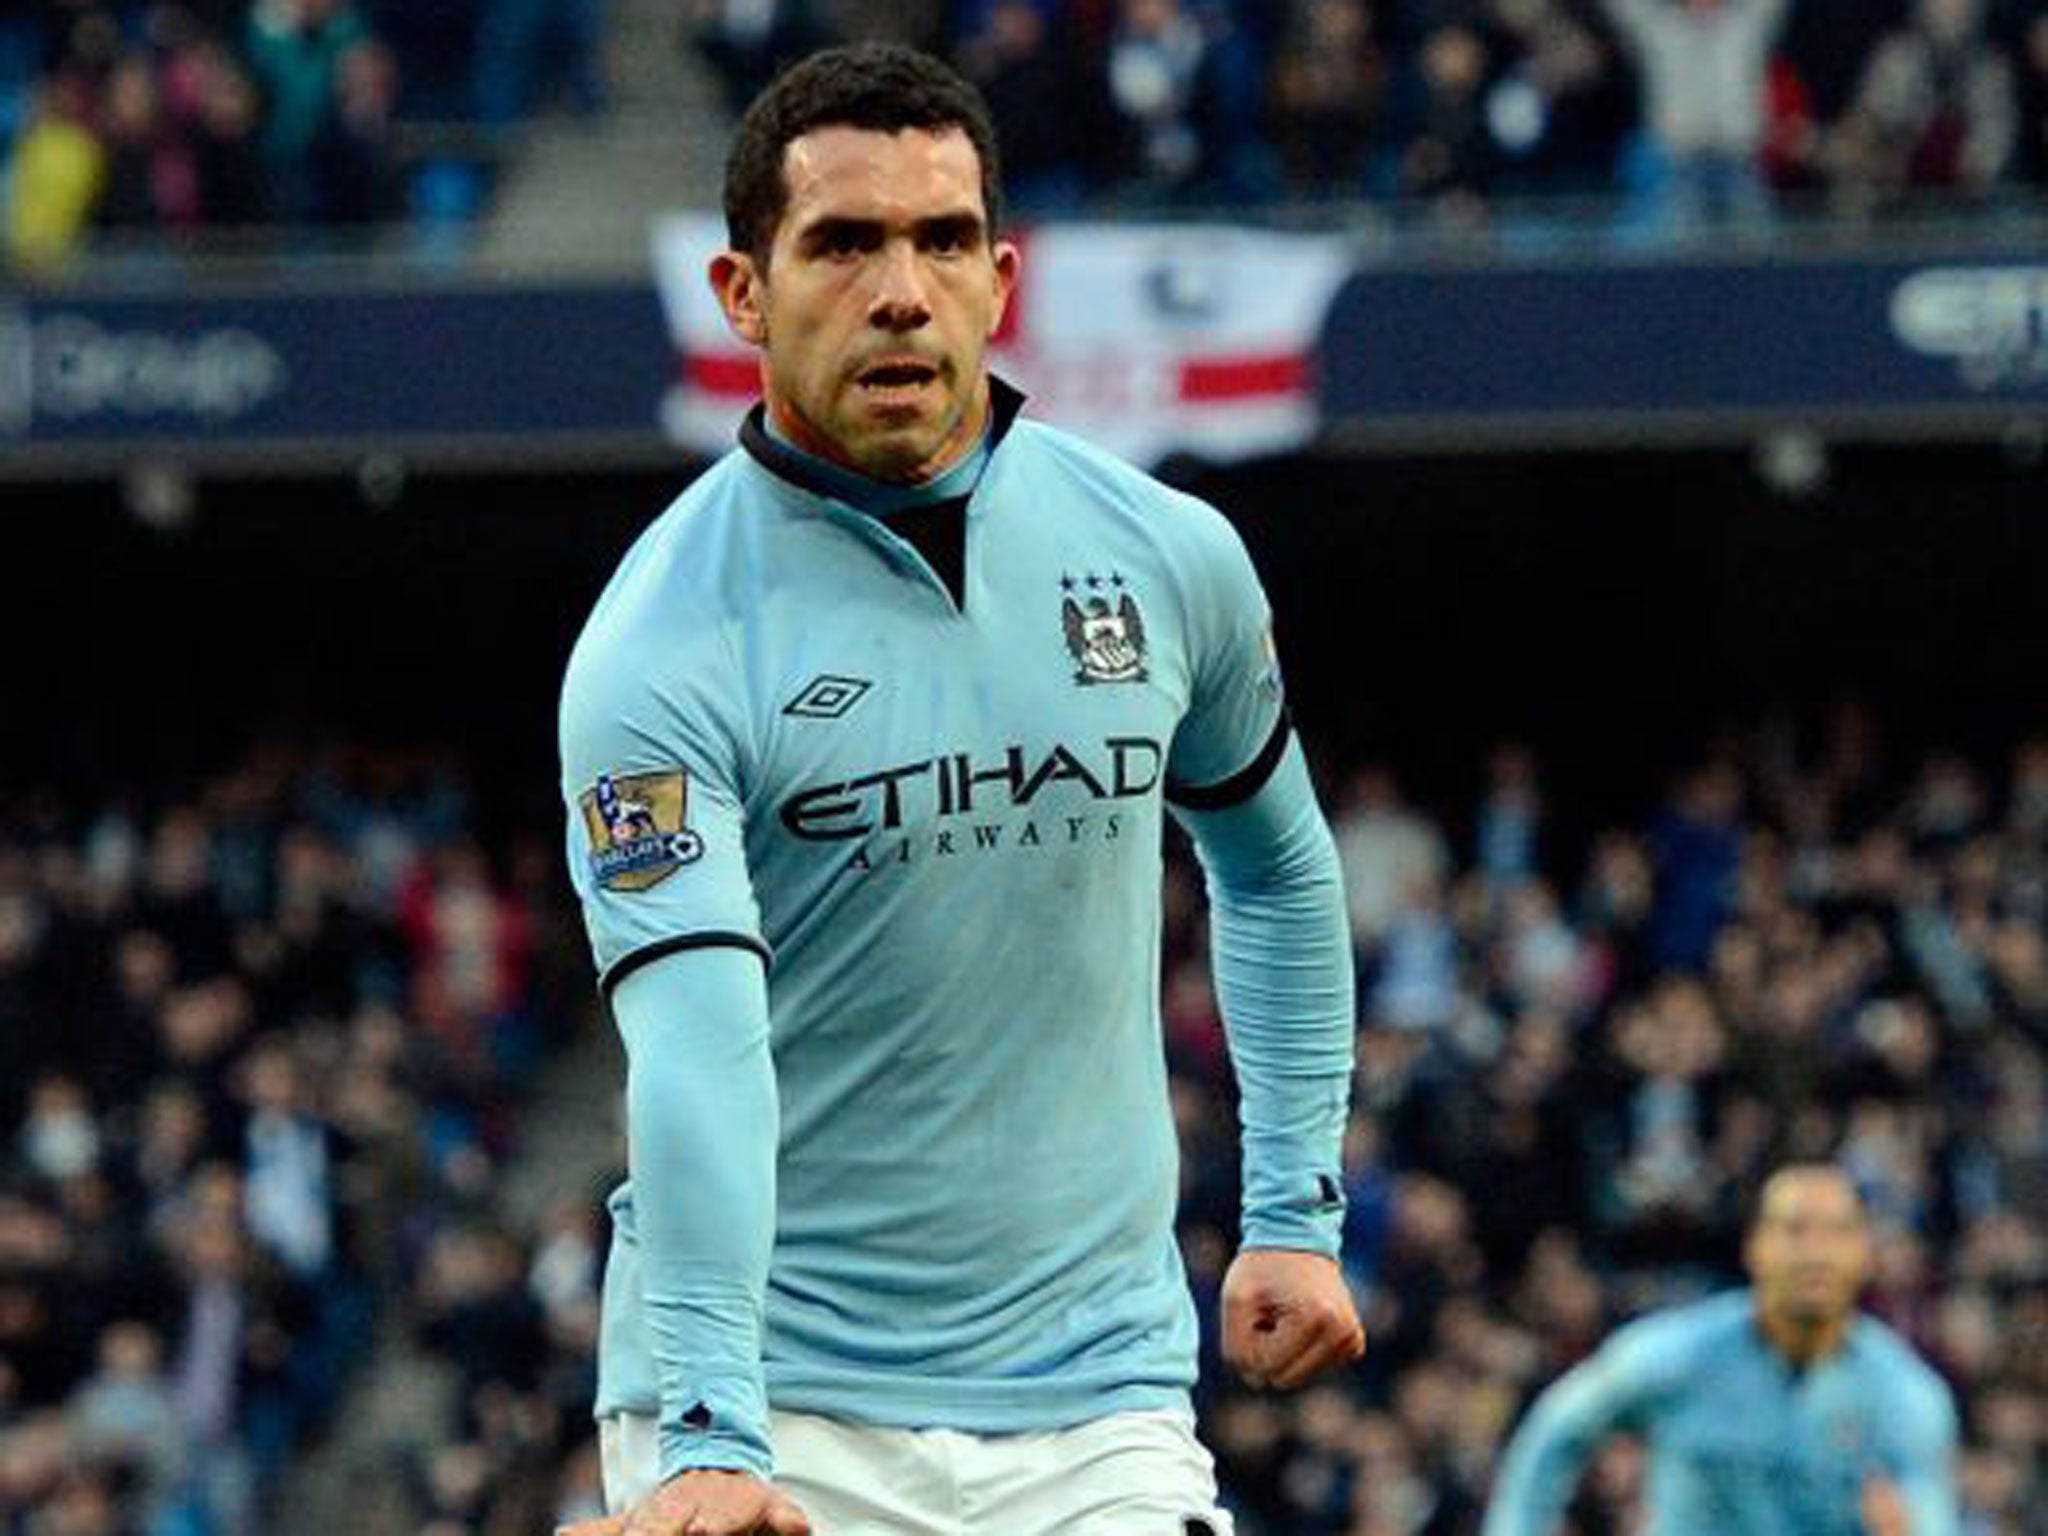 Manchester City striker Carlos Tevez has been disqualified from driving for six months